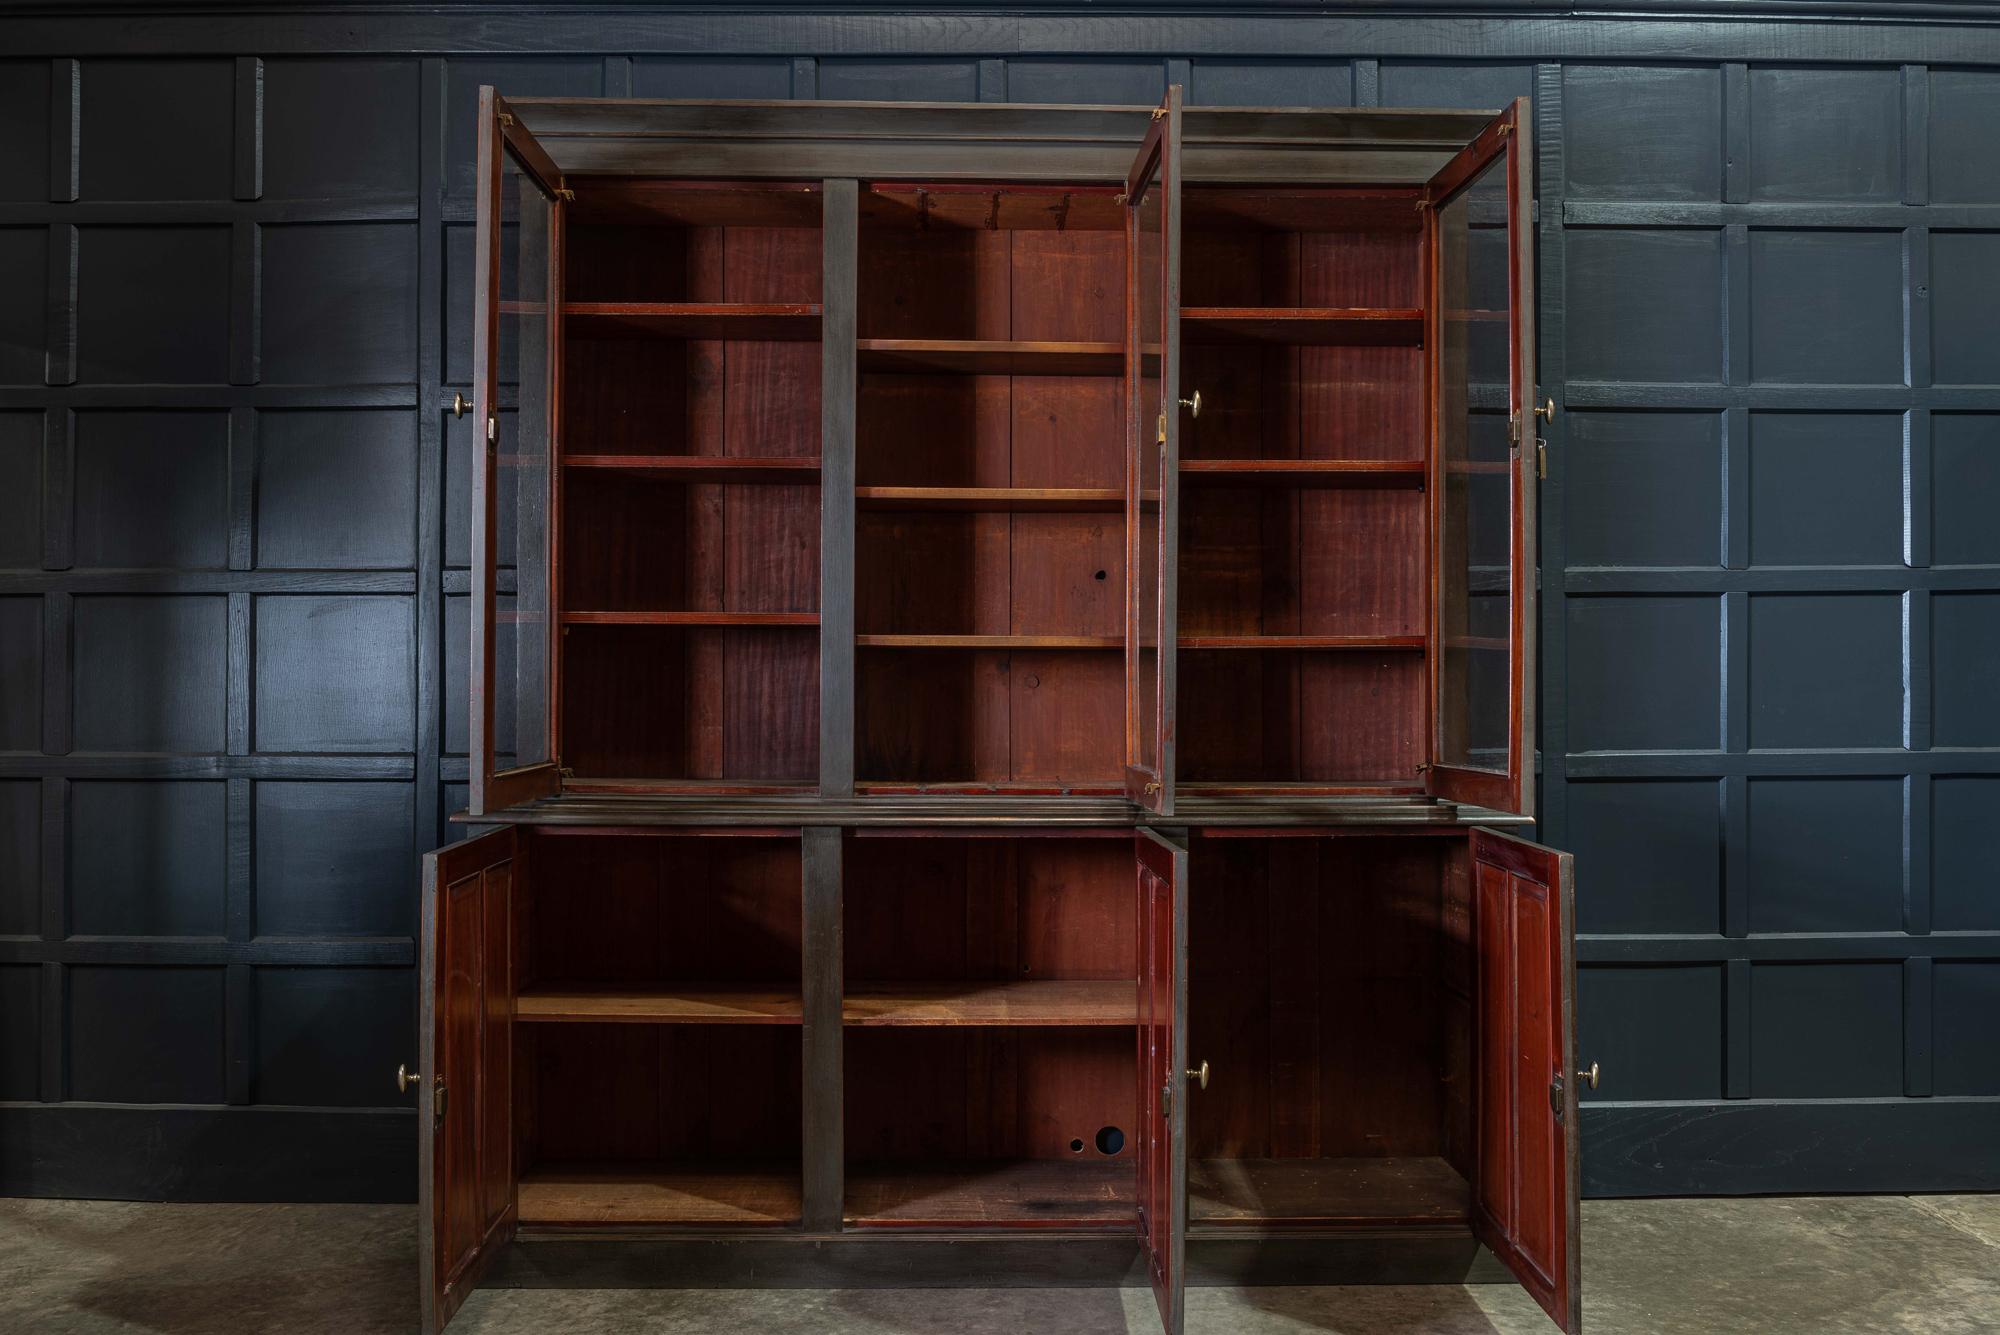 19th century English boardroom mahogany painted glazed bookcase,
circa 1884.

Mahogany Boardroom bookcase from 'The North East Coast Institution of Engineers & Shipbuilders' based in Newcastle. With adjustable shelves to the outer cabinets and